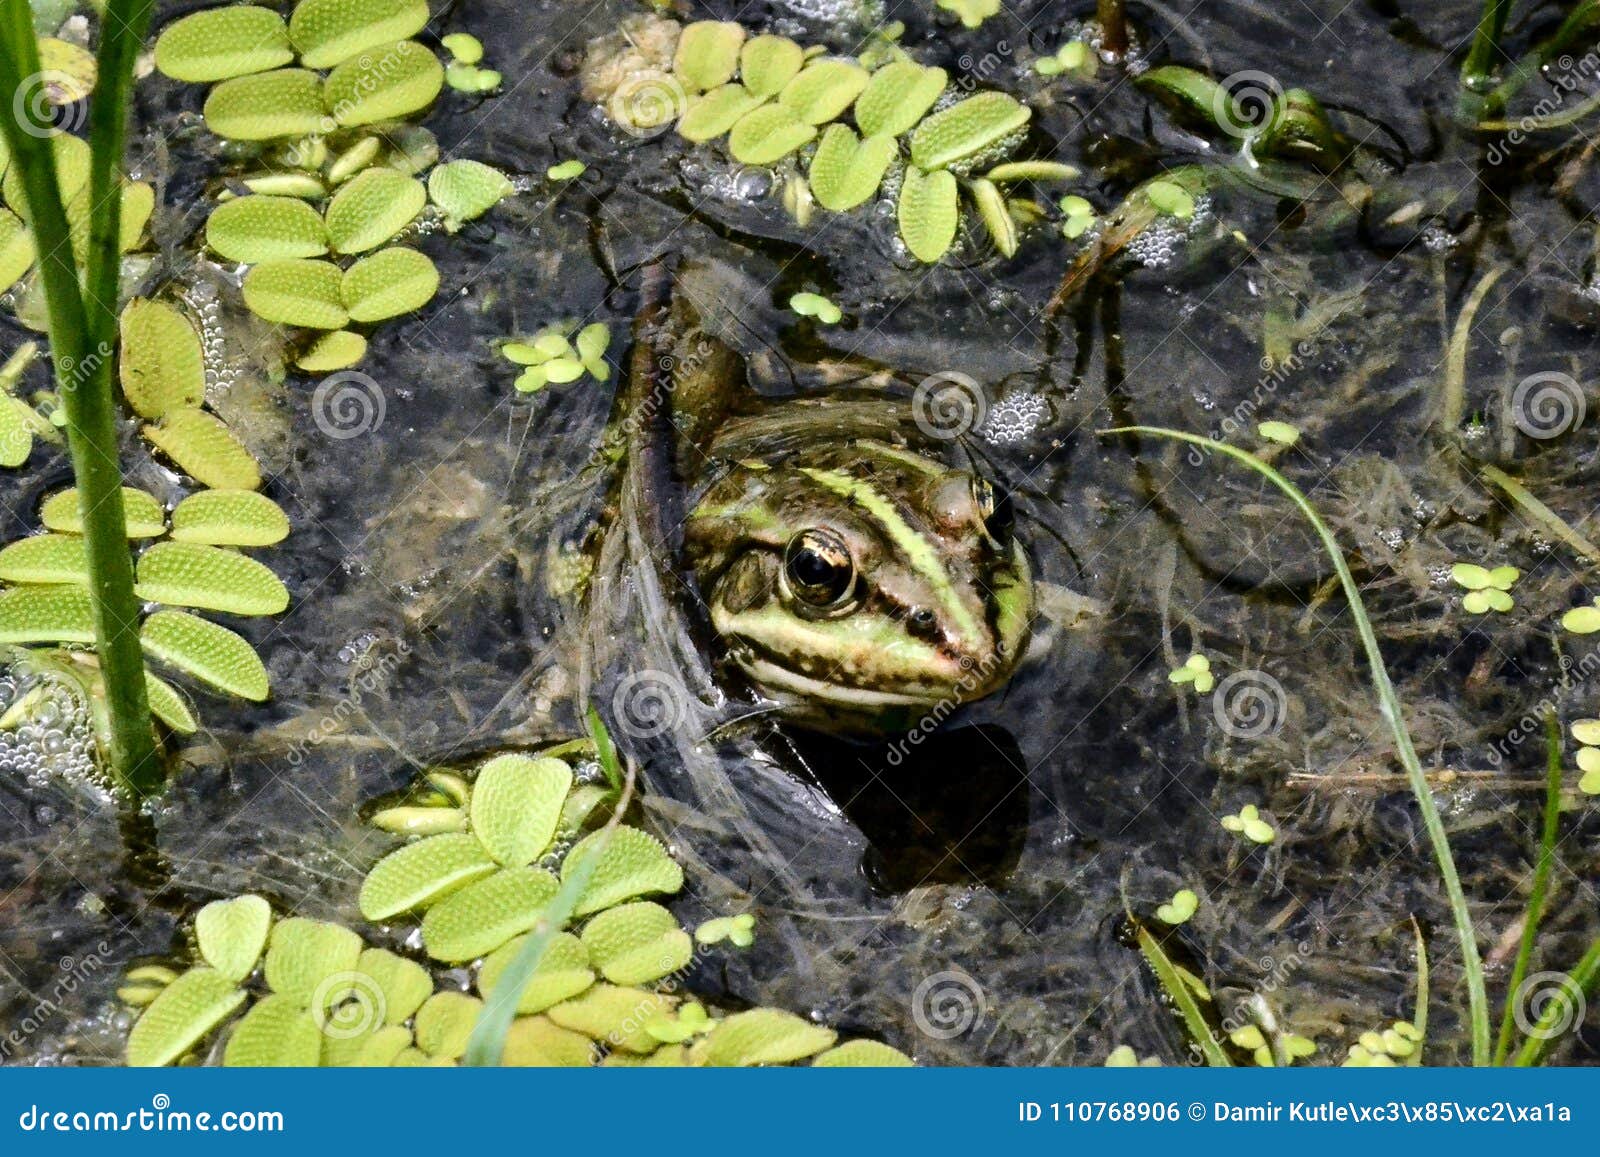 A frog in the city lake stock photo. Image of branch - 110768906